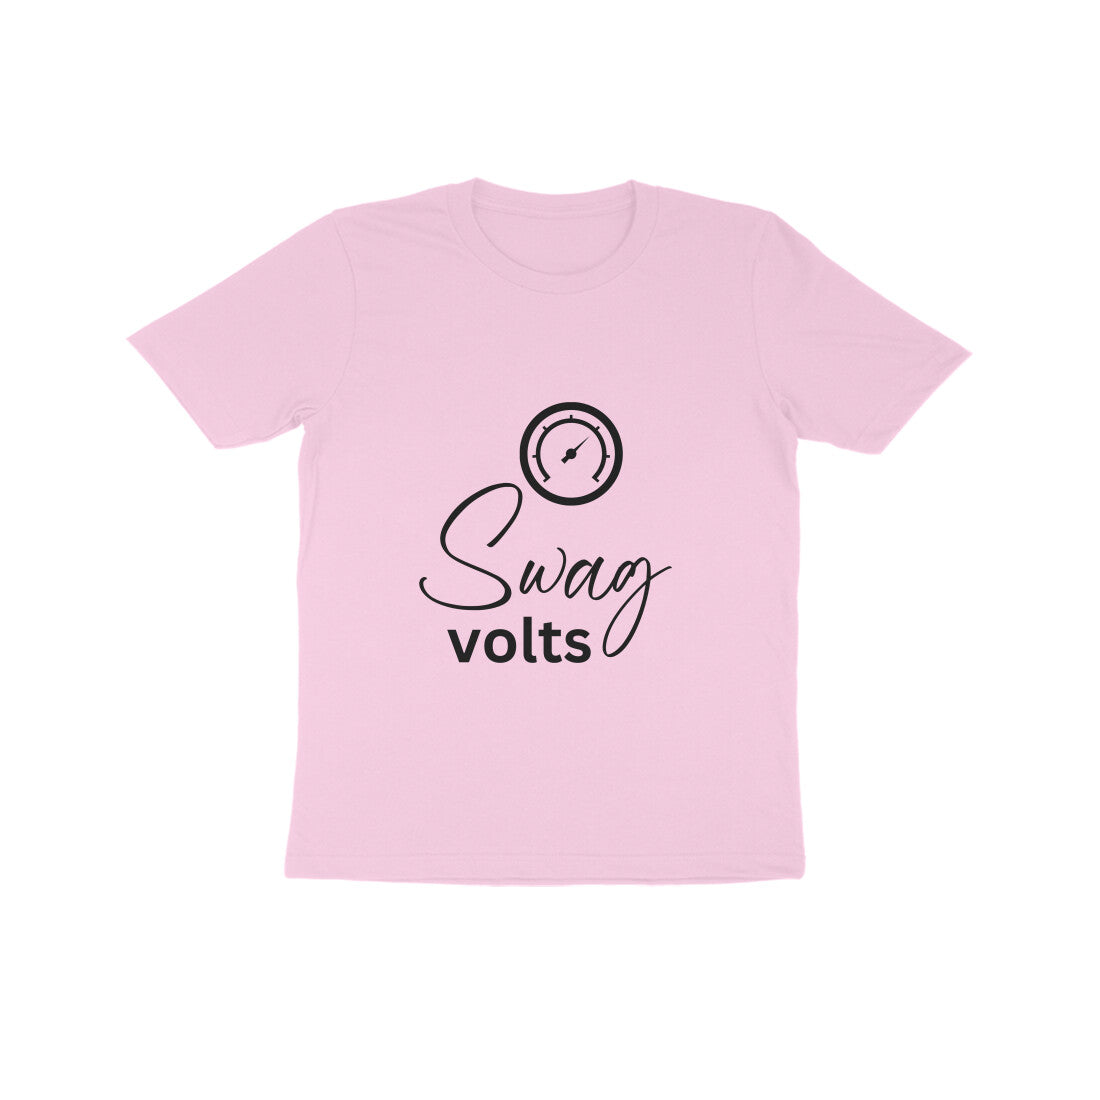 Swag volts' Kids tee